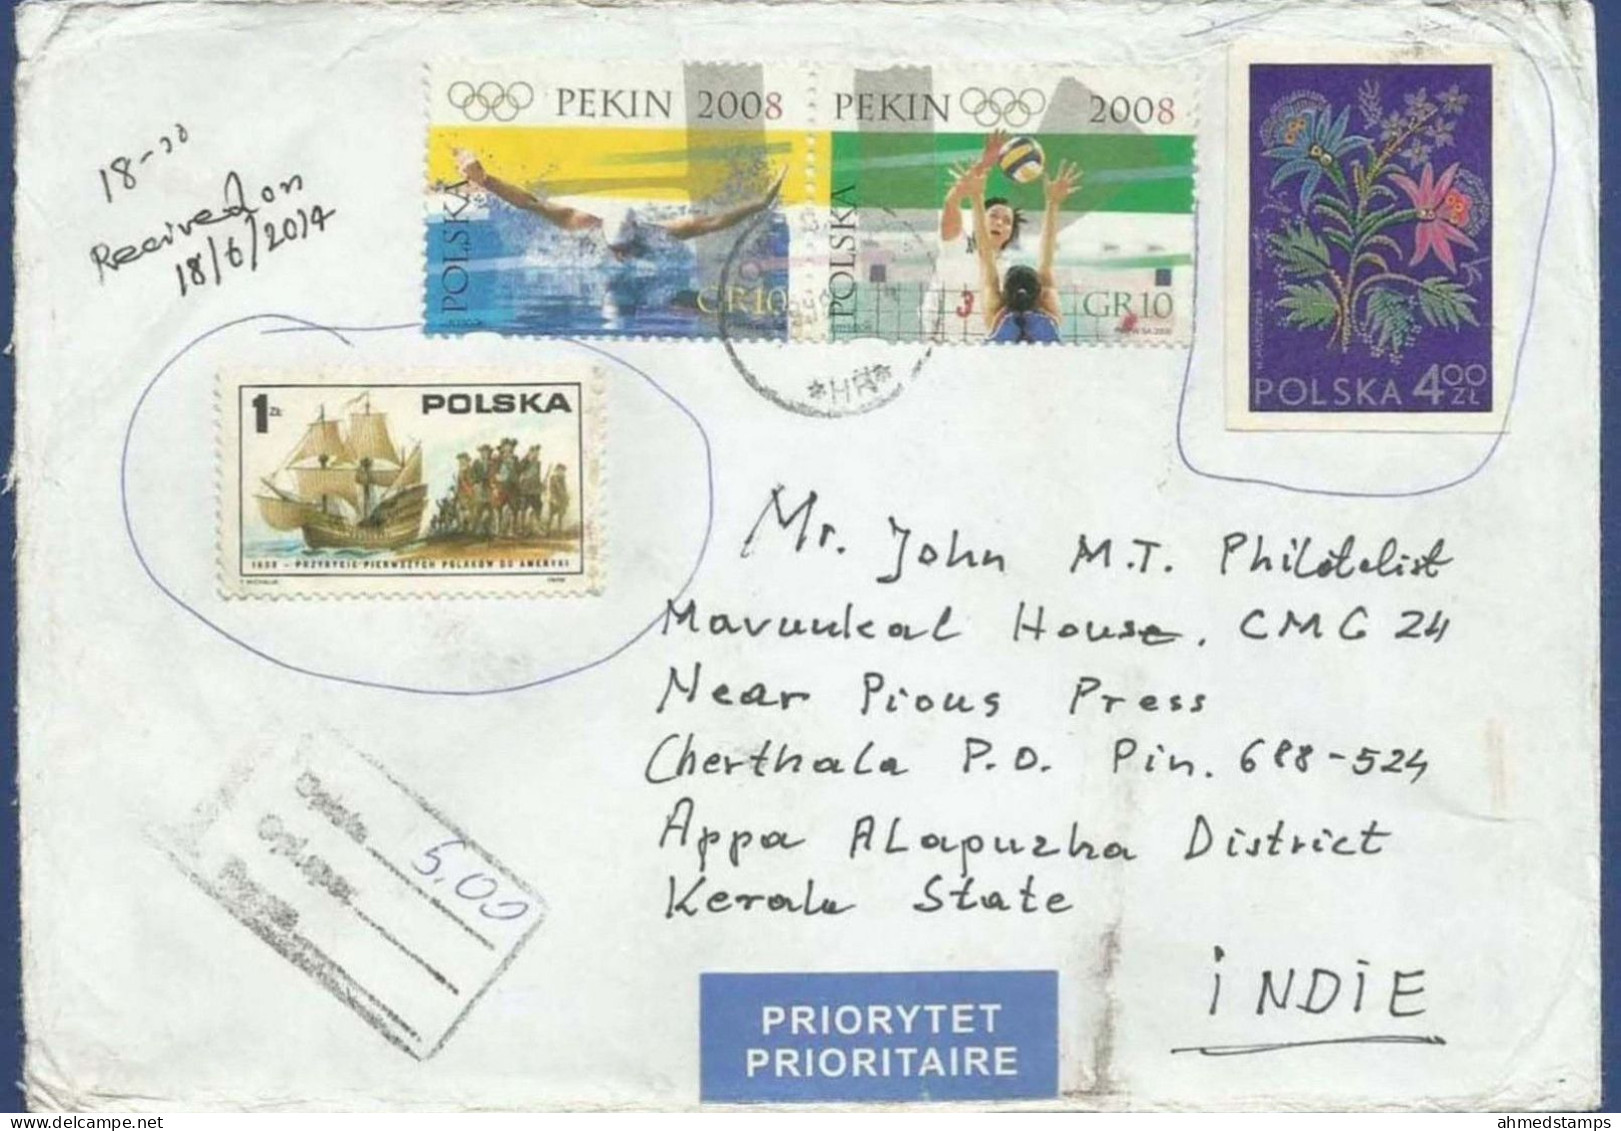 POLAND POSTAL USED AIRMAIL COVER TO INDIA - Unclassified